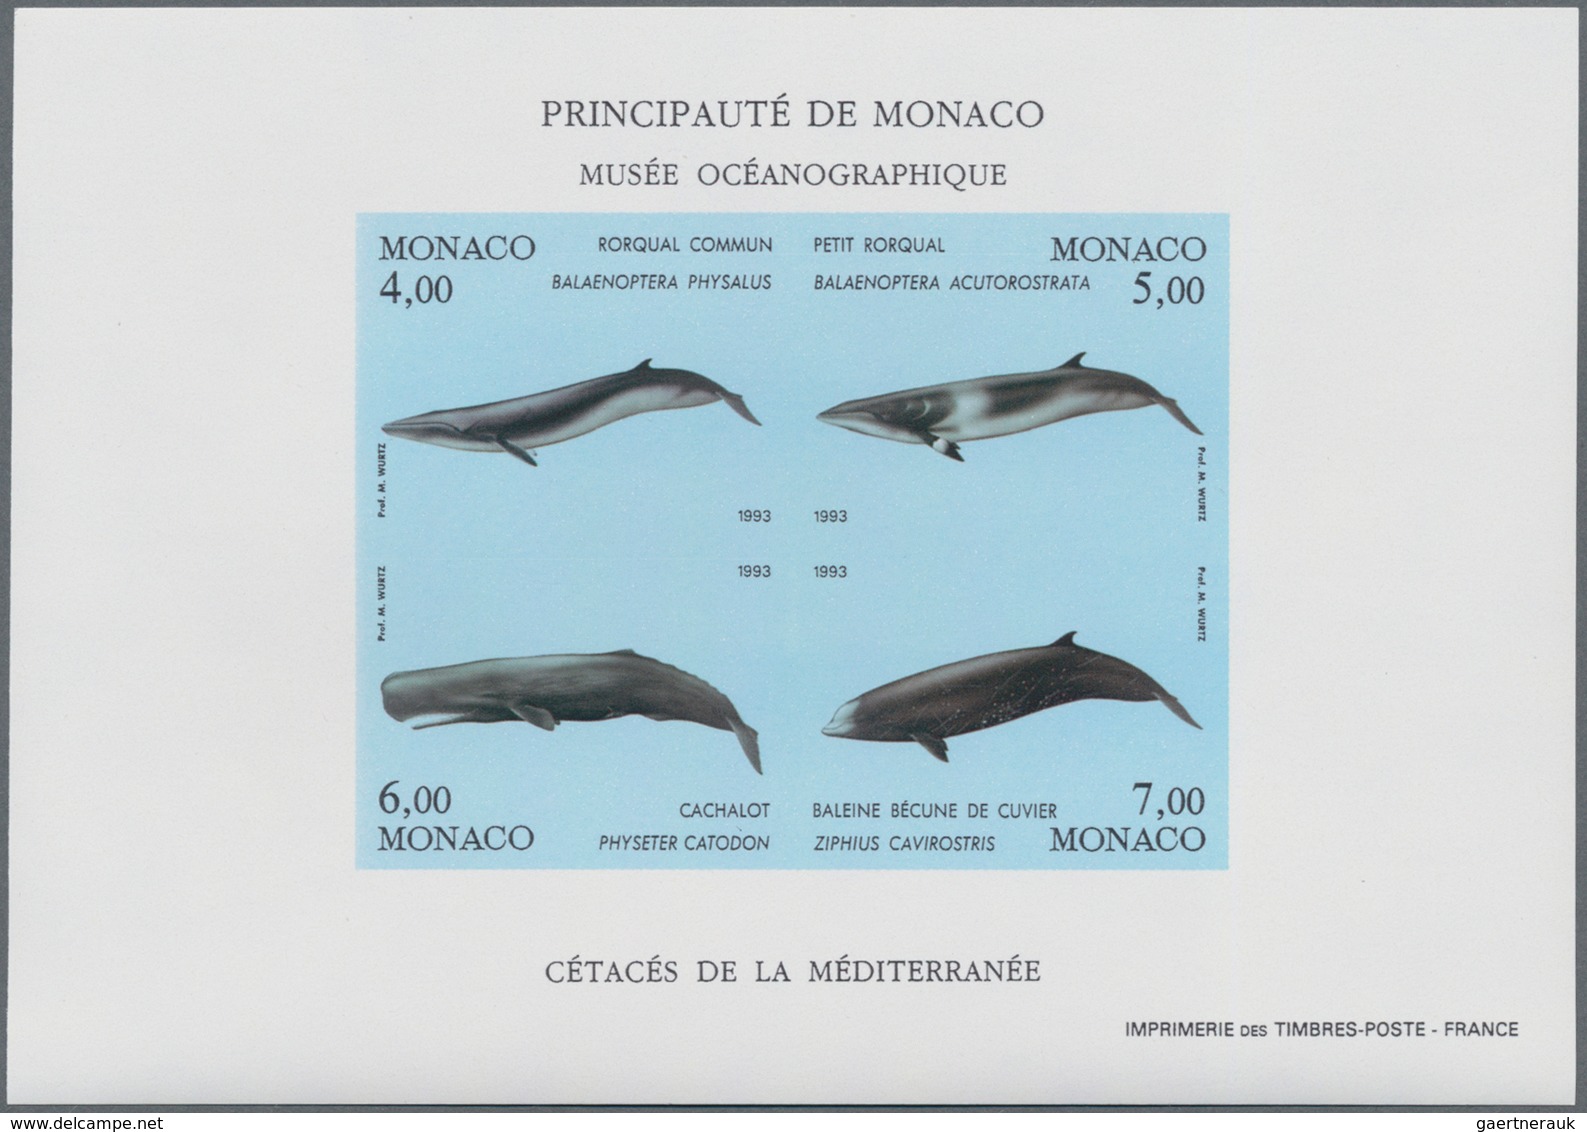 Monaco: 1938/1994, accumulation with 360 MINIATURE SHEETS incl. a nice part IMPERFORATE and SPECIAL